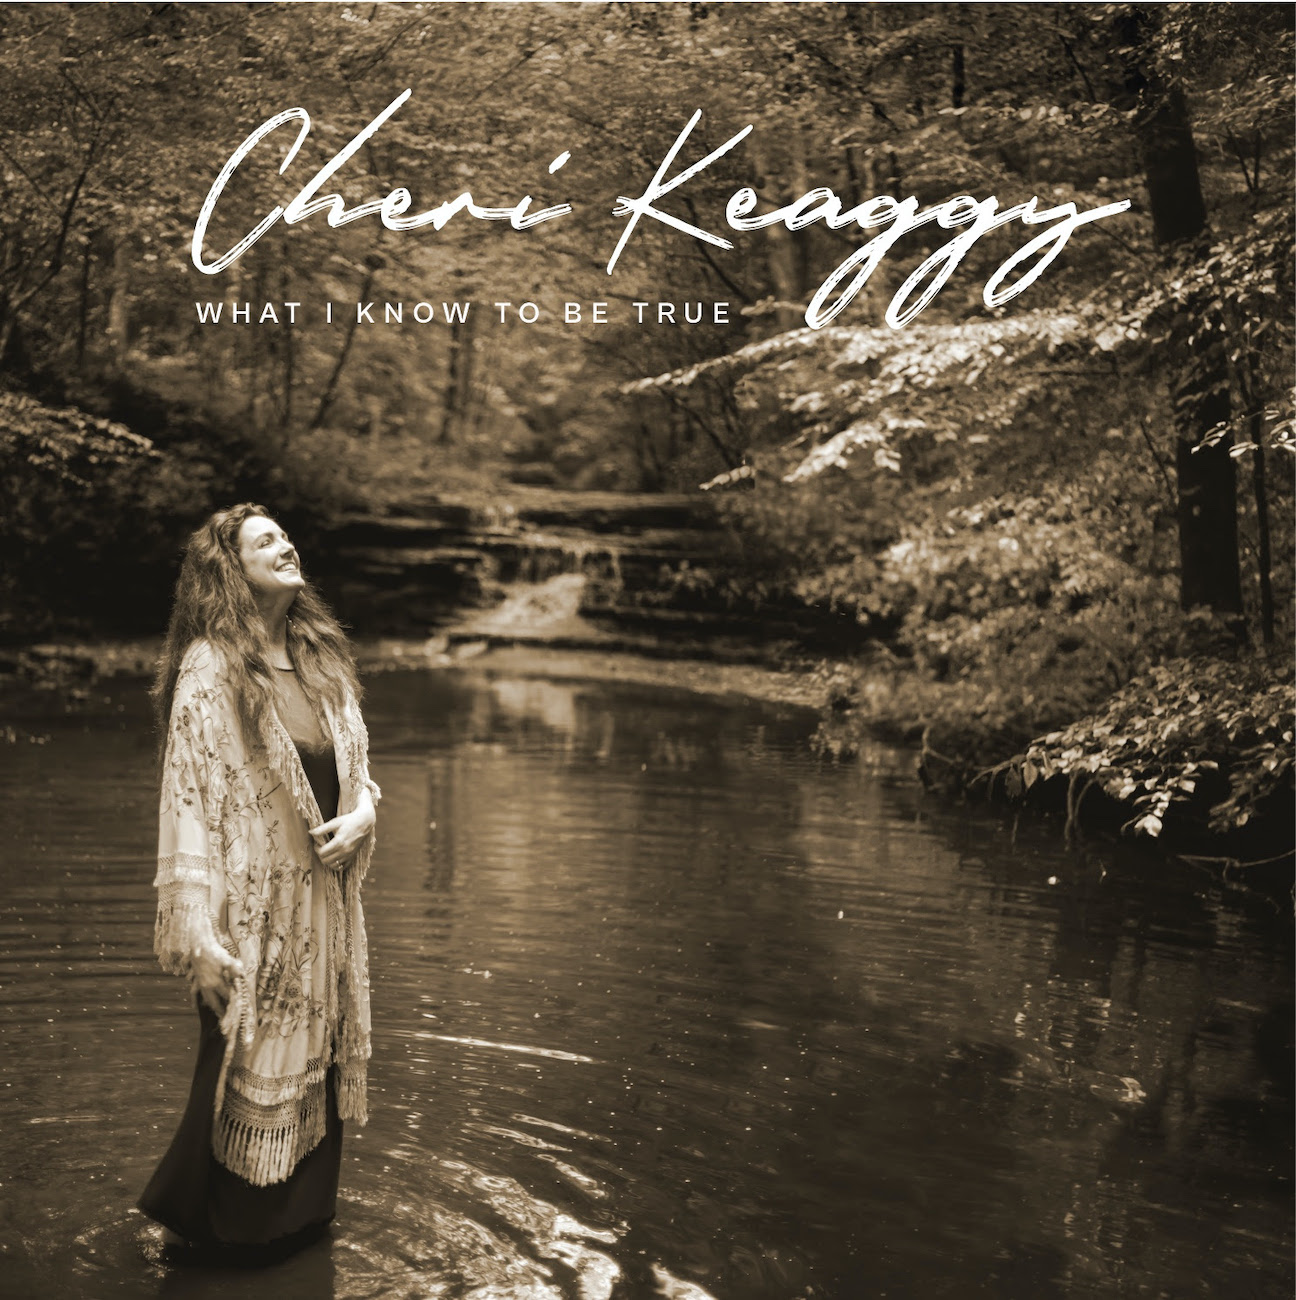 Cheri Keaggy, `What I Know To Be True` (Image courtesy of Turning Point Media Relations)